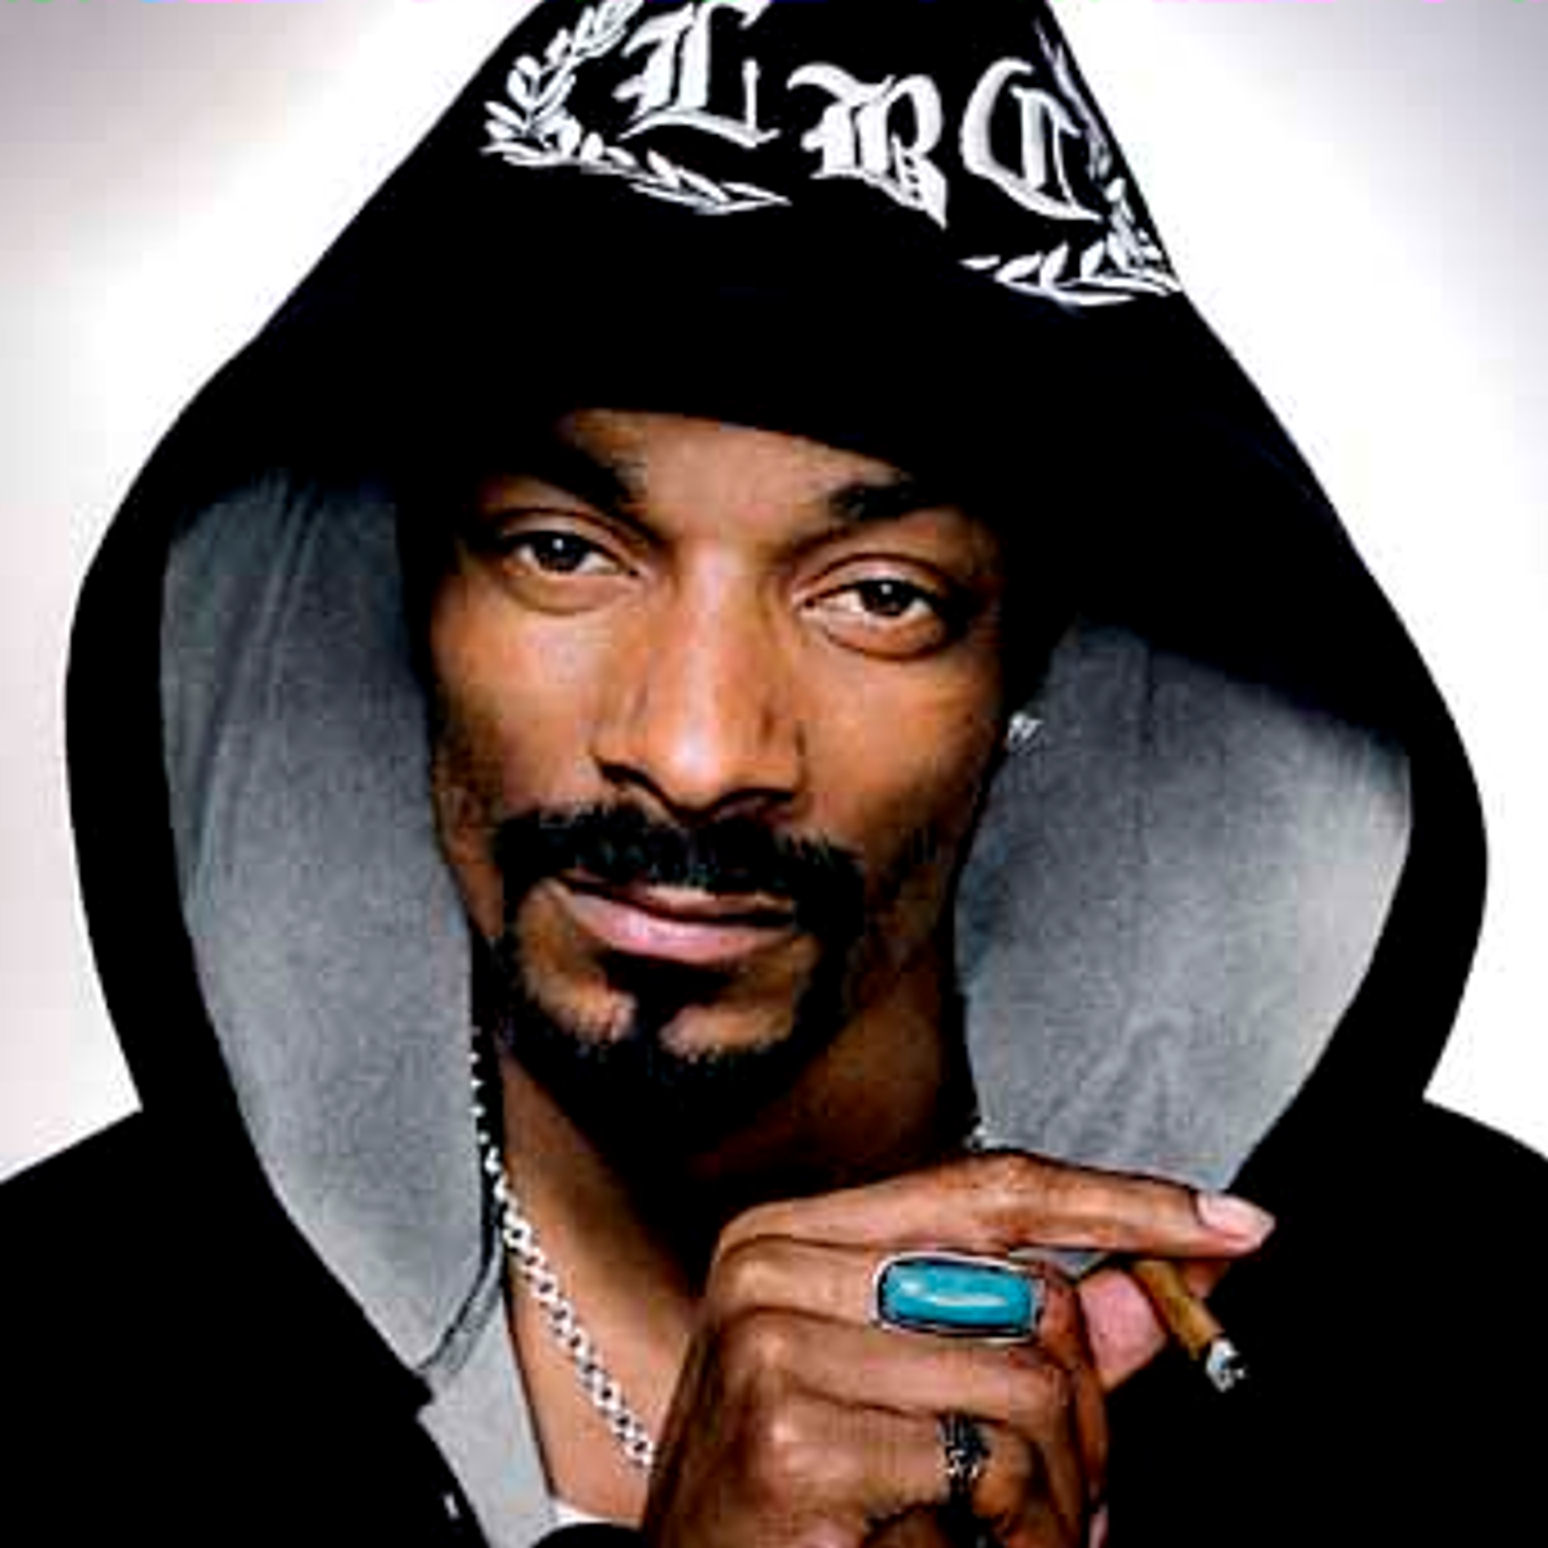 snoop dogg changed his name to snoop lion